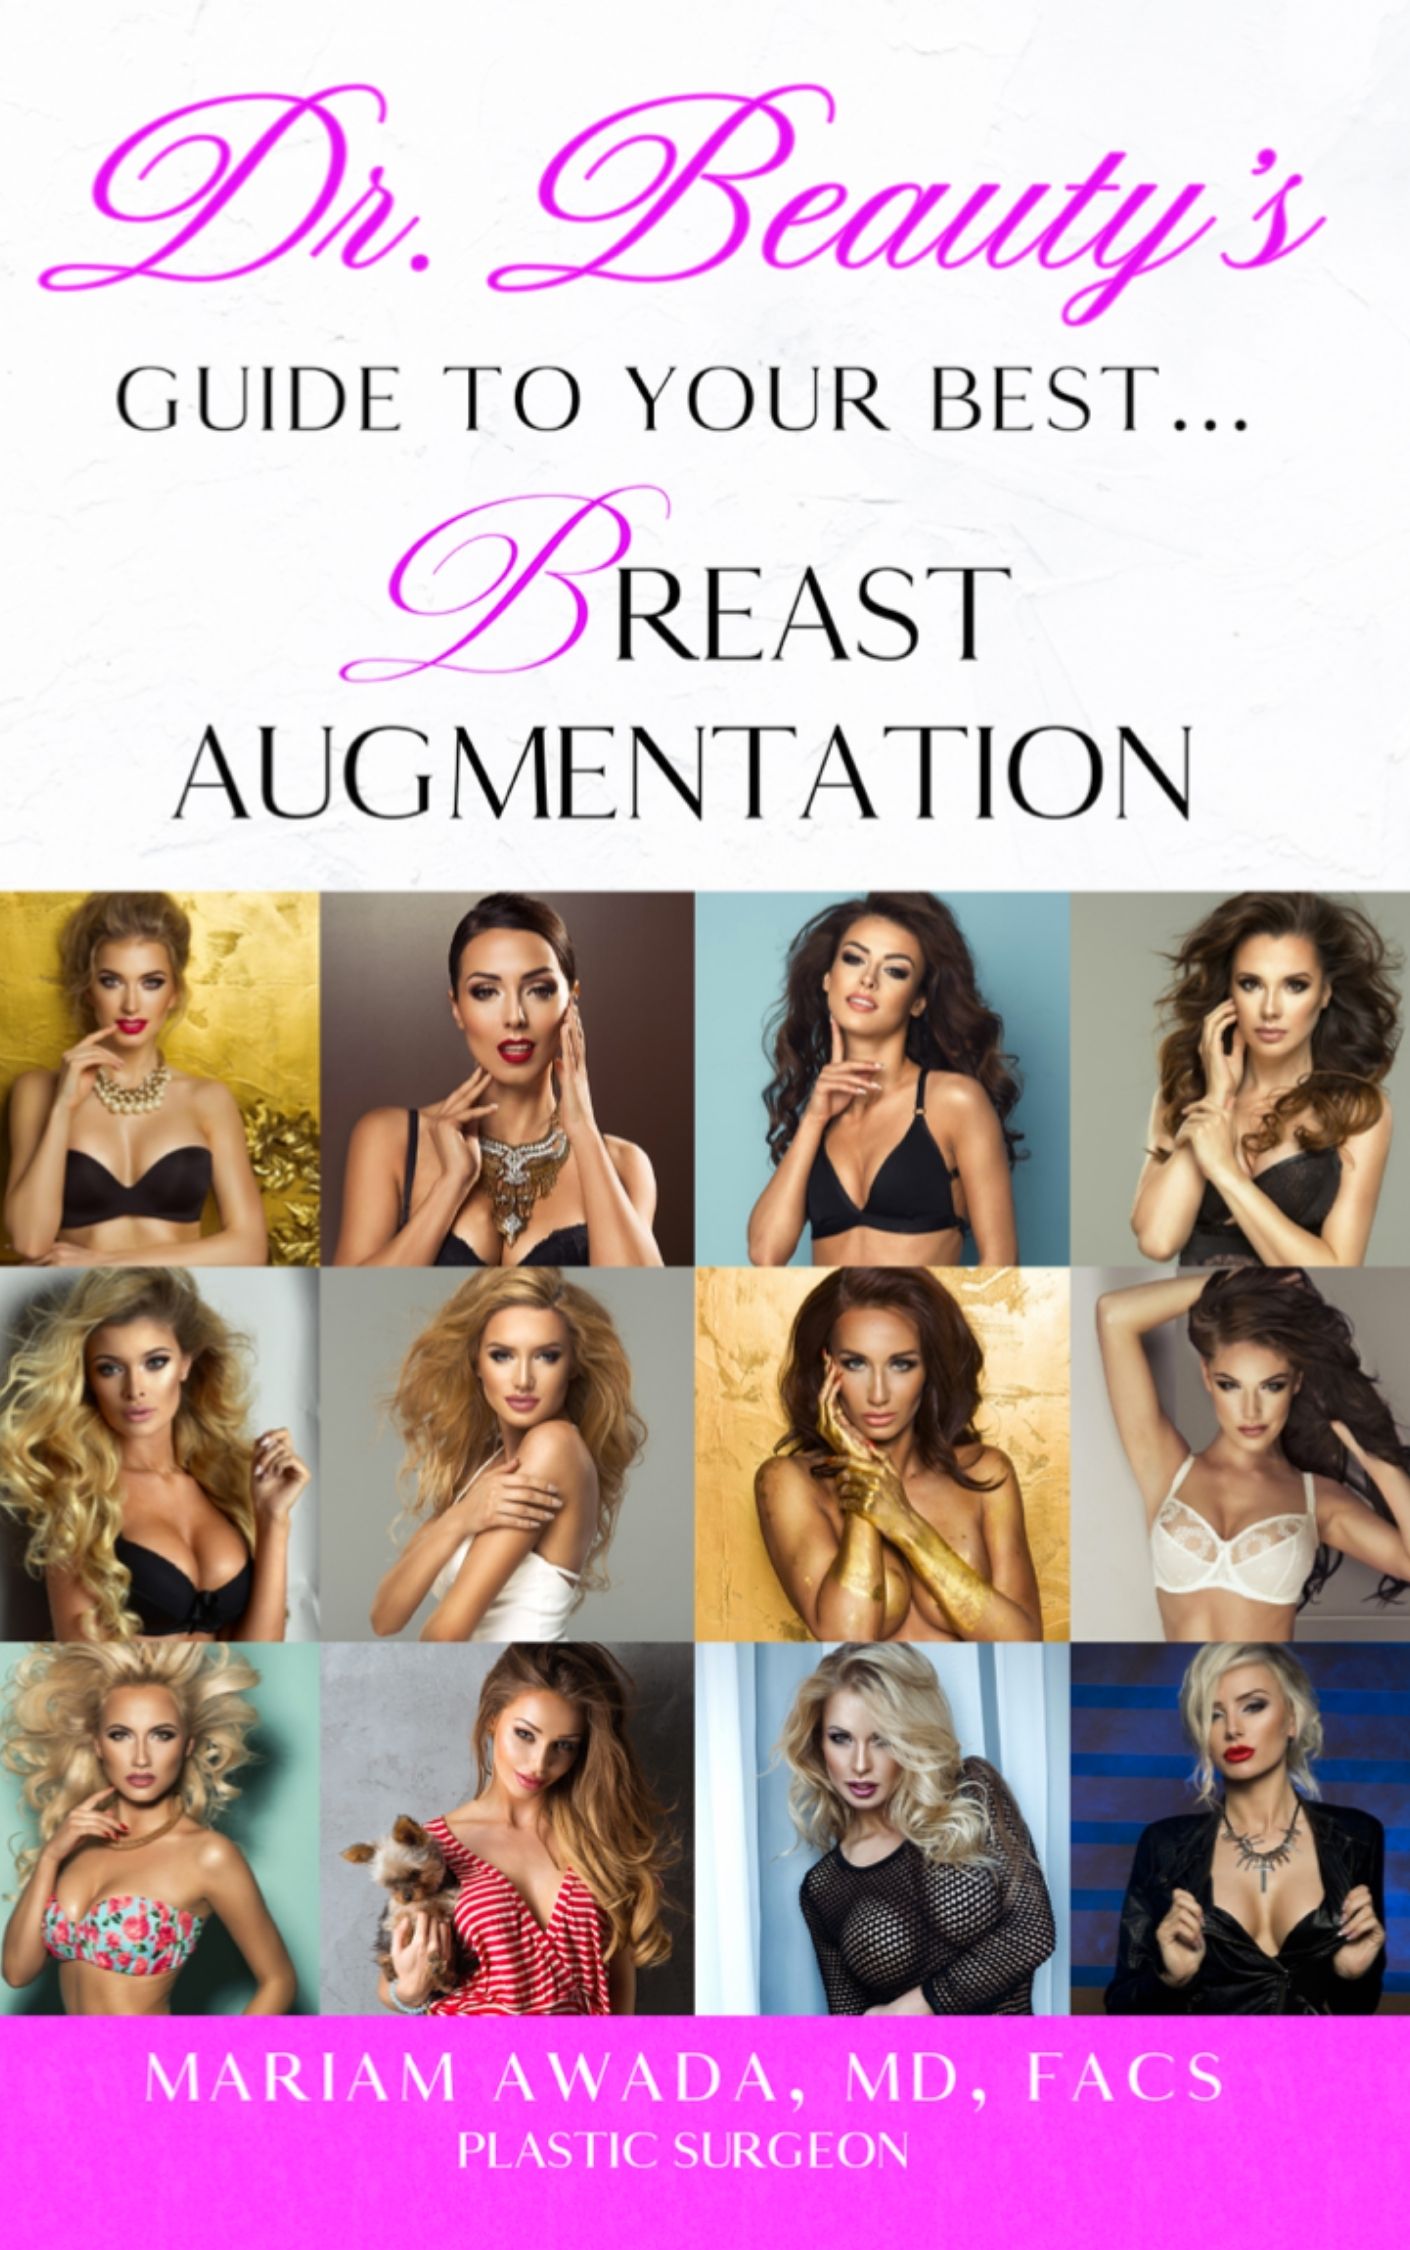 Dr. Beauty's Breast Augmentation